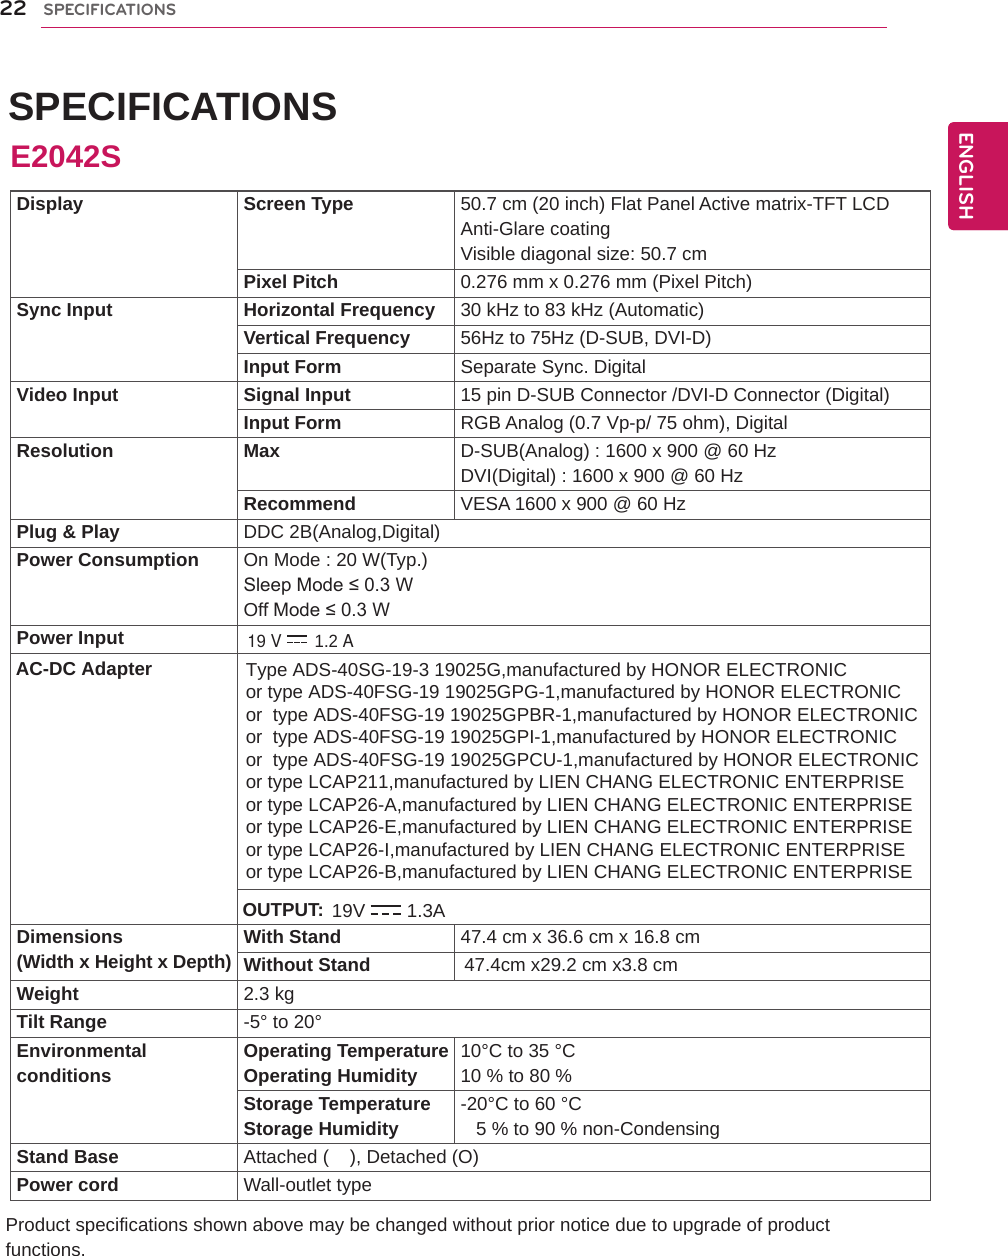 ENGENGLISH SPECIFICATIONS Product specifications shown above may be changed without prior notice due to upgrade of product functions.22SPECIFICATIONSDisplay Screen Type 50.7 cm (20 inch) Flat Panel Active matrix-TFT LCDAnti-Glare coatingVisible diagonal size: 50.7 cmPixel Pitch 0.276 mm x 0.276 mm (Pixel Pitch)Sync Input Horizontal Frequency 30 kHz to 83 kHz (Automatic)Vertical Frequency 56Hz to 75Hz (D-SUB, DVI-D)Input Form Separate Sync. DigitalVideo Input Signal Input 15 pin D-SUB Connector /DVI-D Connector (Digital)Input Form RGB Analog (0.7 Vp-p/ 75 ohm), DigitalResolution Max D-SUB(Analog) : 1600 x 900 @ 60 HzDVI(Digital) : 1600 x 900 @ 60 HzRecommend VESA 1600 x 900 @ 60 HzPlug &amp; Play DDC 2B(Analog,Digital)Power Consumption On Mode : 20 W(Typ.)Sleep Mode ≤ 0.3 W Off Mode ≤ 0.3 W Power InputDimensions(Width x Height x Depth) With Stand 47.4 cm x 36.6 cm x 16.8 cmWithout Stand                  47.4cm x29.2 cm x3.8 cmWeight 2.3 kgTilt Range -5° to 20°Environmentalconditions Operating TemperatureOperating Humidity 10°C to 35 °C10 % to 80 % Storage TemperatureStorage Humidity -20°C to 60 °C   5 % to 90 % non-CondensingStand Base Attached (    ), Detached (O)Power cord Wall-outlet typeE2042S19 V 1.2 A AC-DC Adapter Type ADS-40SG-19-3 19025G,manufactured by HONOR ELECTRONICor type ADS-40FSG-19 19025GPG-1,manufactured by HONOR ELECTRONICor  type ADS-40FSG-19 19025GPBR-1,manufactured by HONOR ELECTRONICor  type ADS-40FSG-19 19025GPI-1,manufactured by HONOR ELECTRONICor  type ADS-40FSG-19 19025GPCU-1,manufactured by HONOR ELECTRONICor type LCAP211,manufactured by LIEN CHANG ELECTRONIC ENTERPRISEor type LCAP26-A,manufactured by LIEN CHANG ELECTRONIC ENTERPRISEor type LCAP26-E,manufactured by LIEN CHANG ELECTRONIC ENTERPRISEor type LCAP26-I,manufactured by LIEN CHANG ELECTRONIC ENTERPRISEor type LCAP26-B,manufactured by LIEN CHANG ELECTRONIC ENTERPRISE OUTPUT: 19V 1.3A